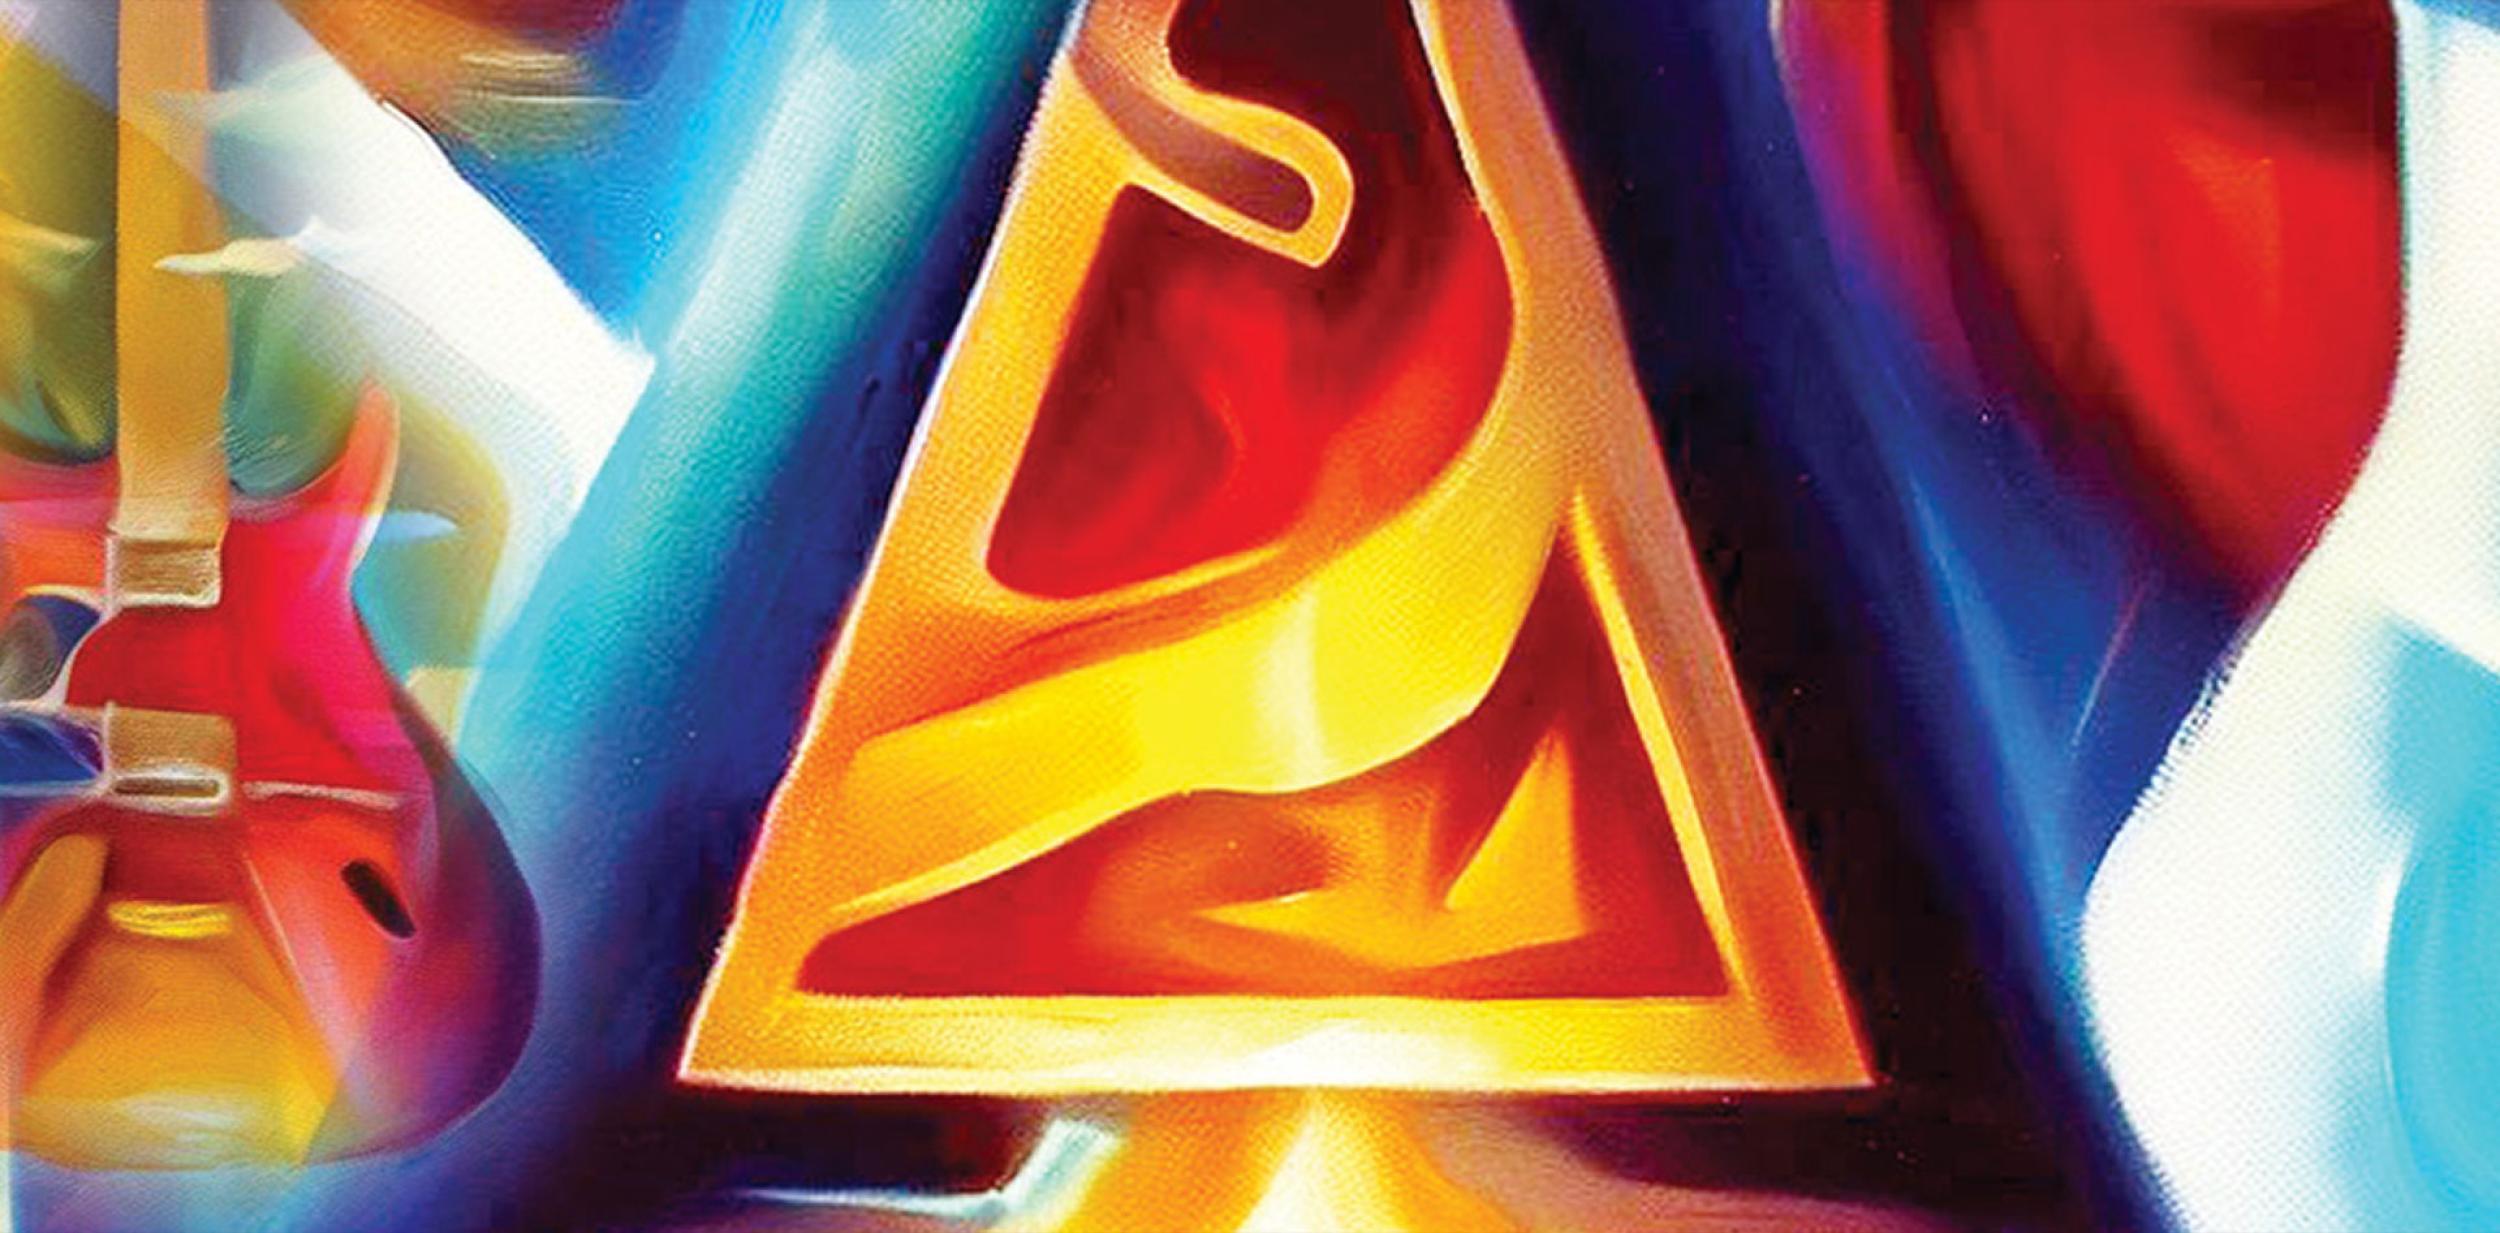 Abstract artwork of a triangle and musical instruments